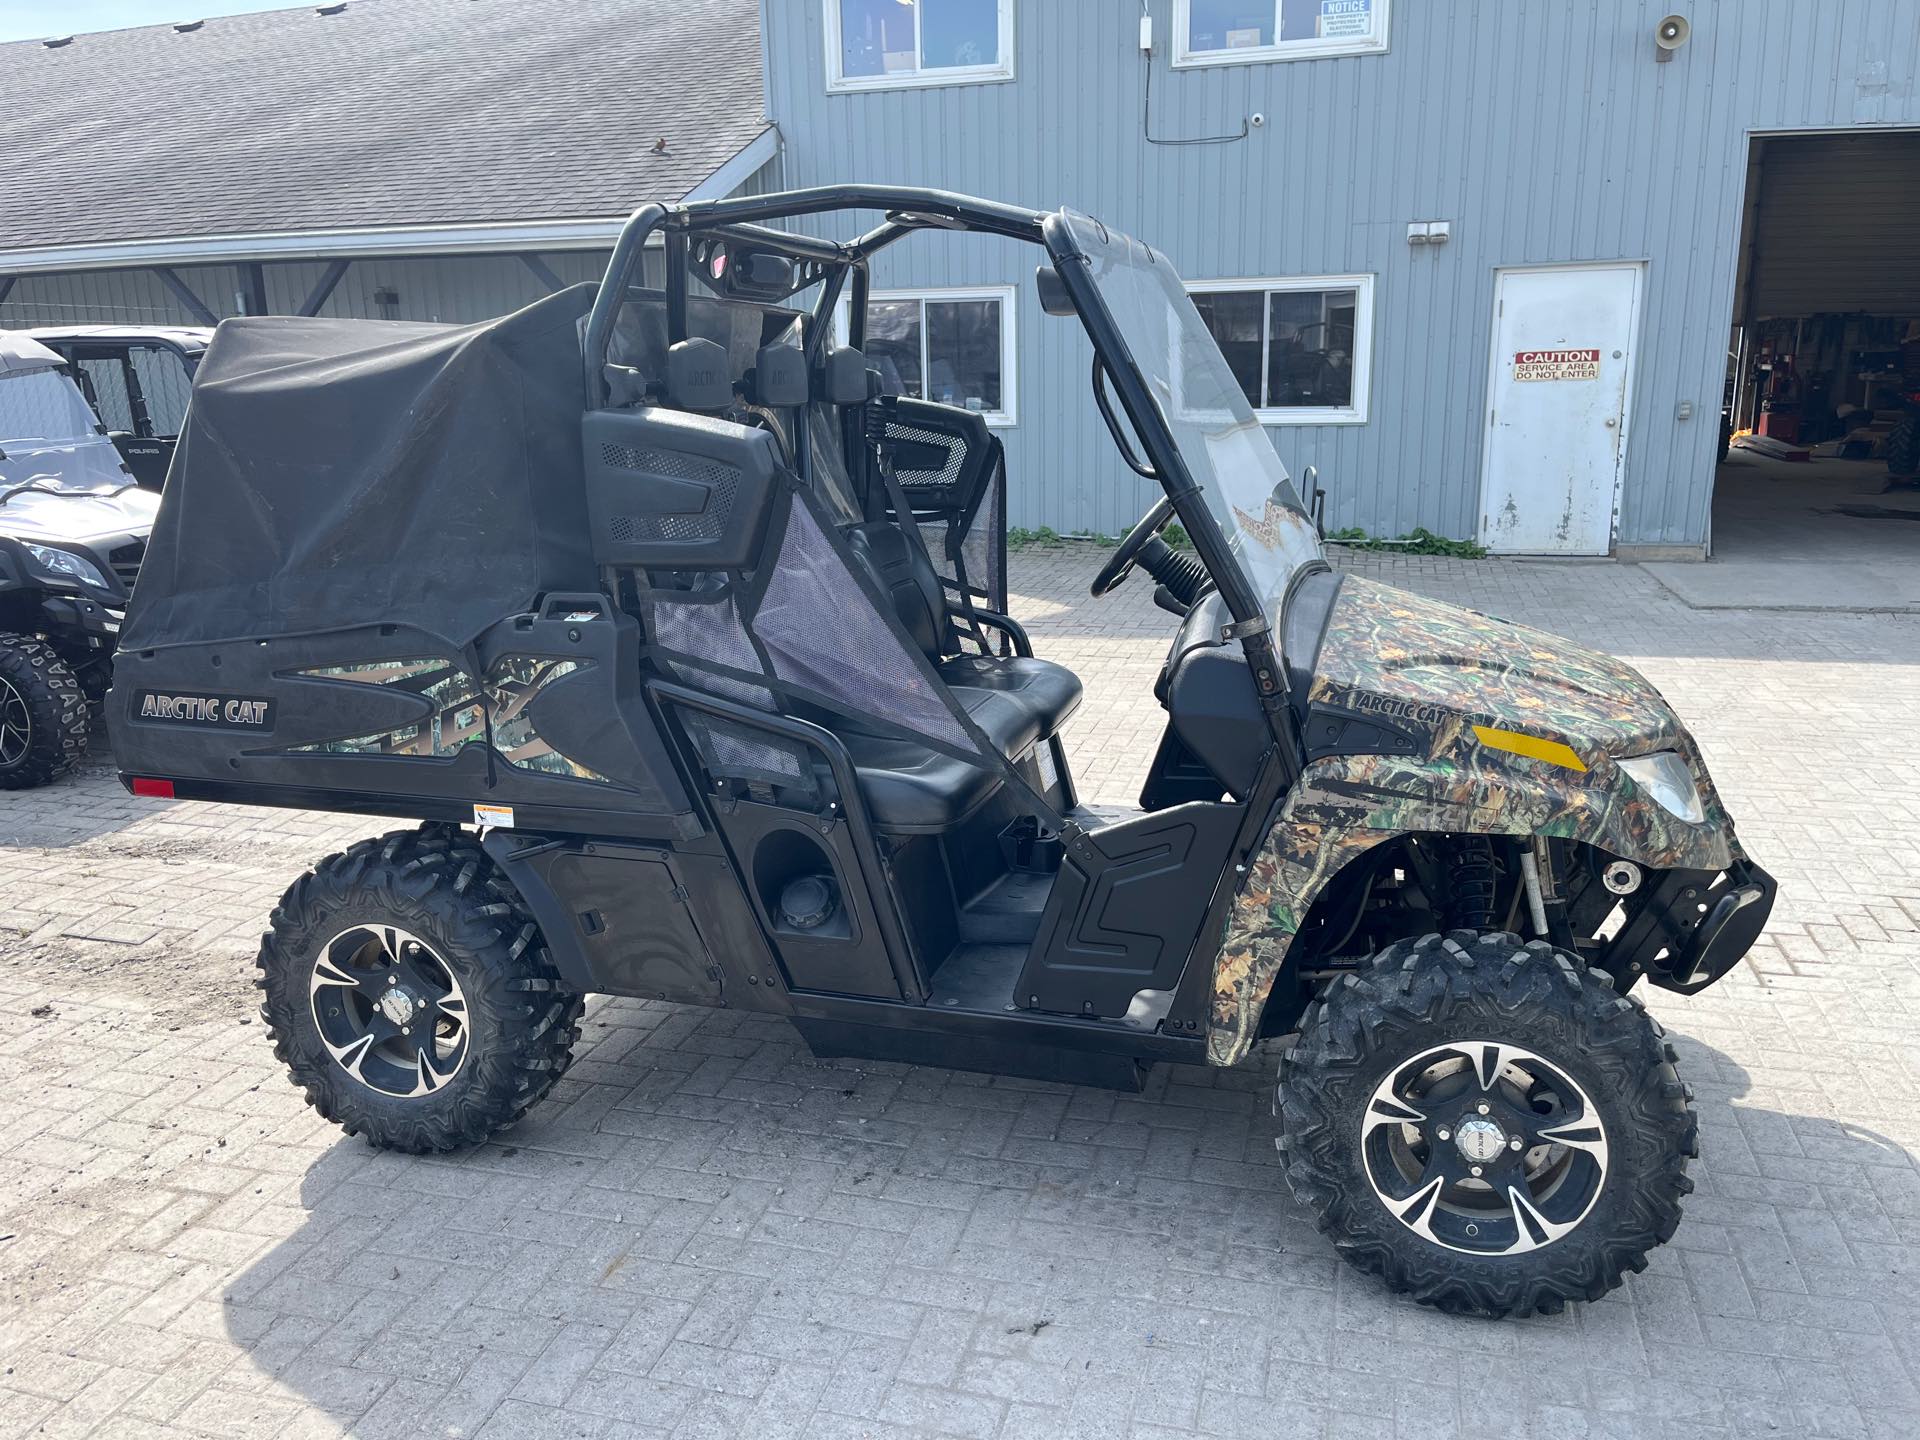 2014 ARTIC CAT PROWLER700 HDX at DT Powersports & Marine